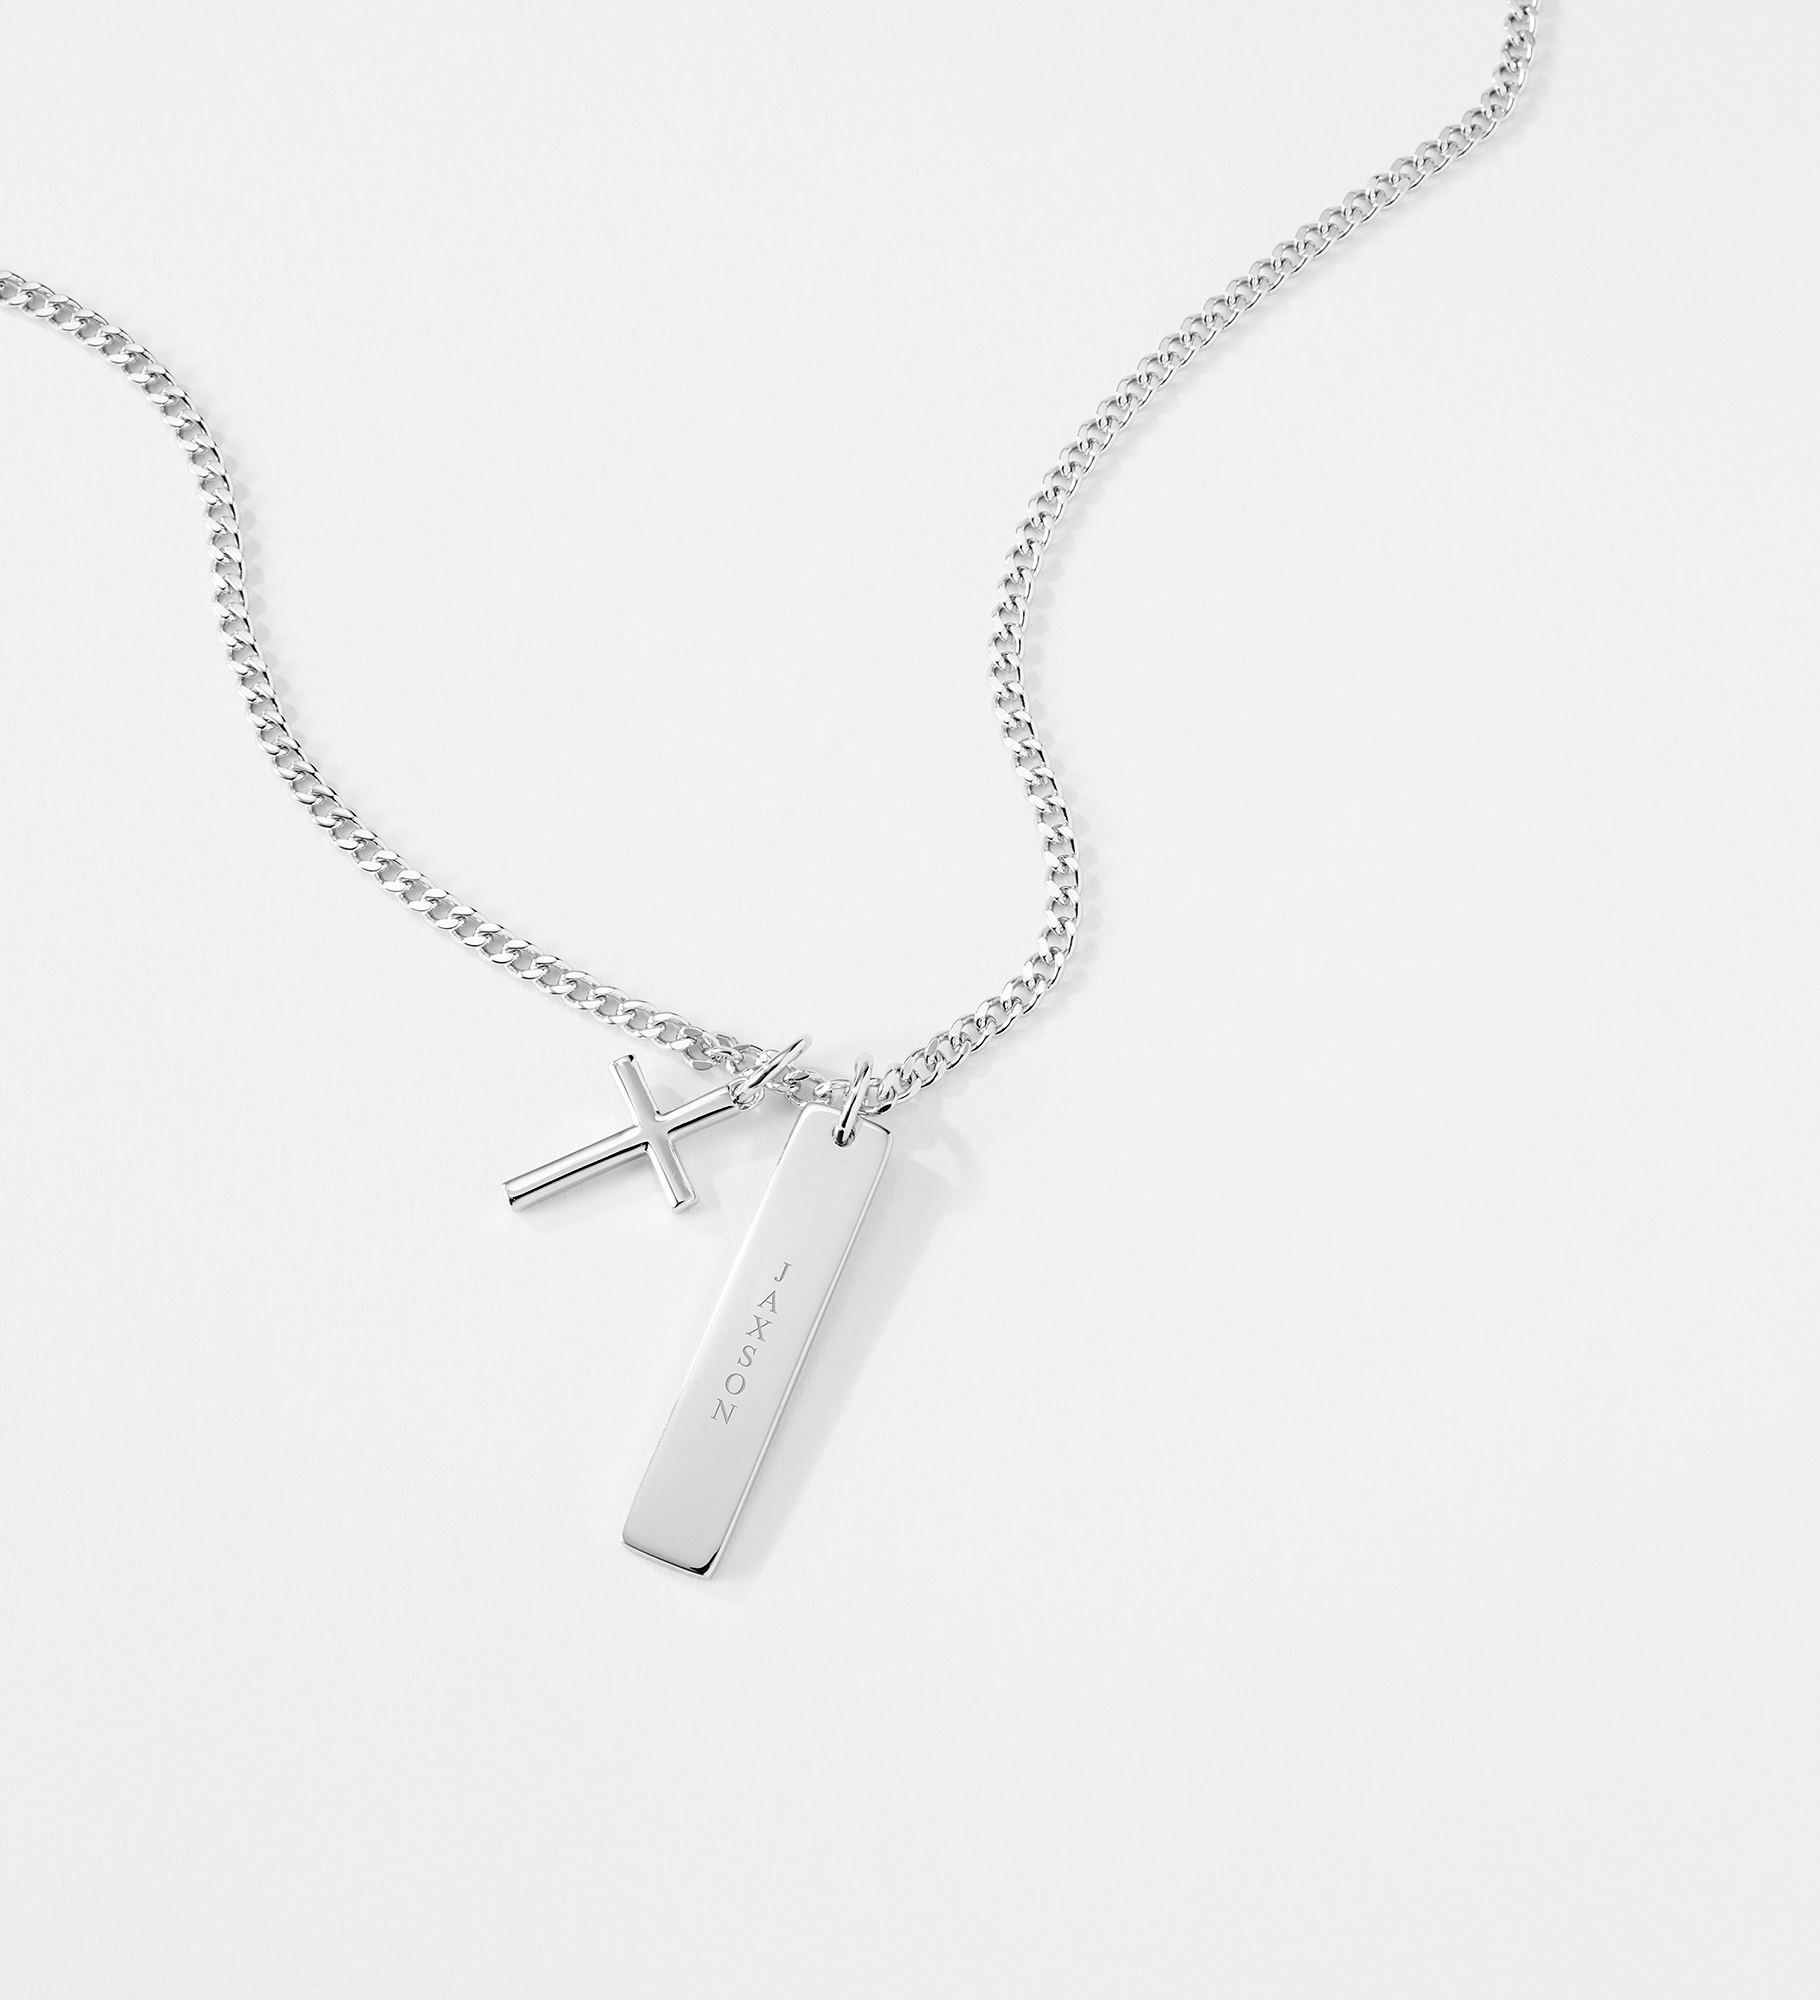  Engraved Sterling Silver Cross and Bar Necklace